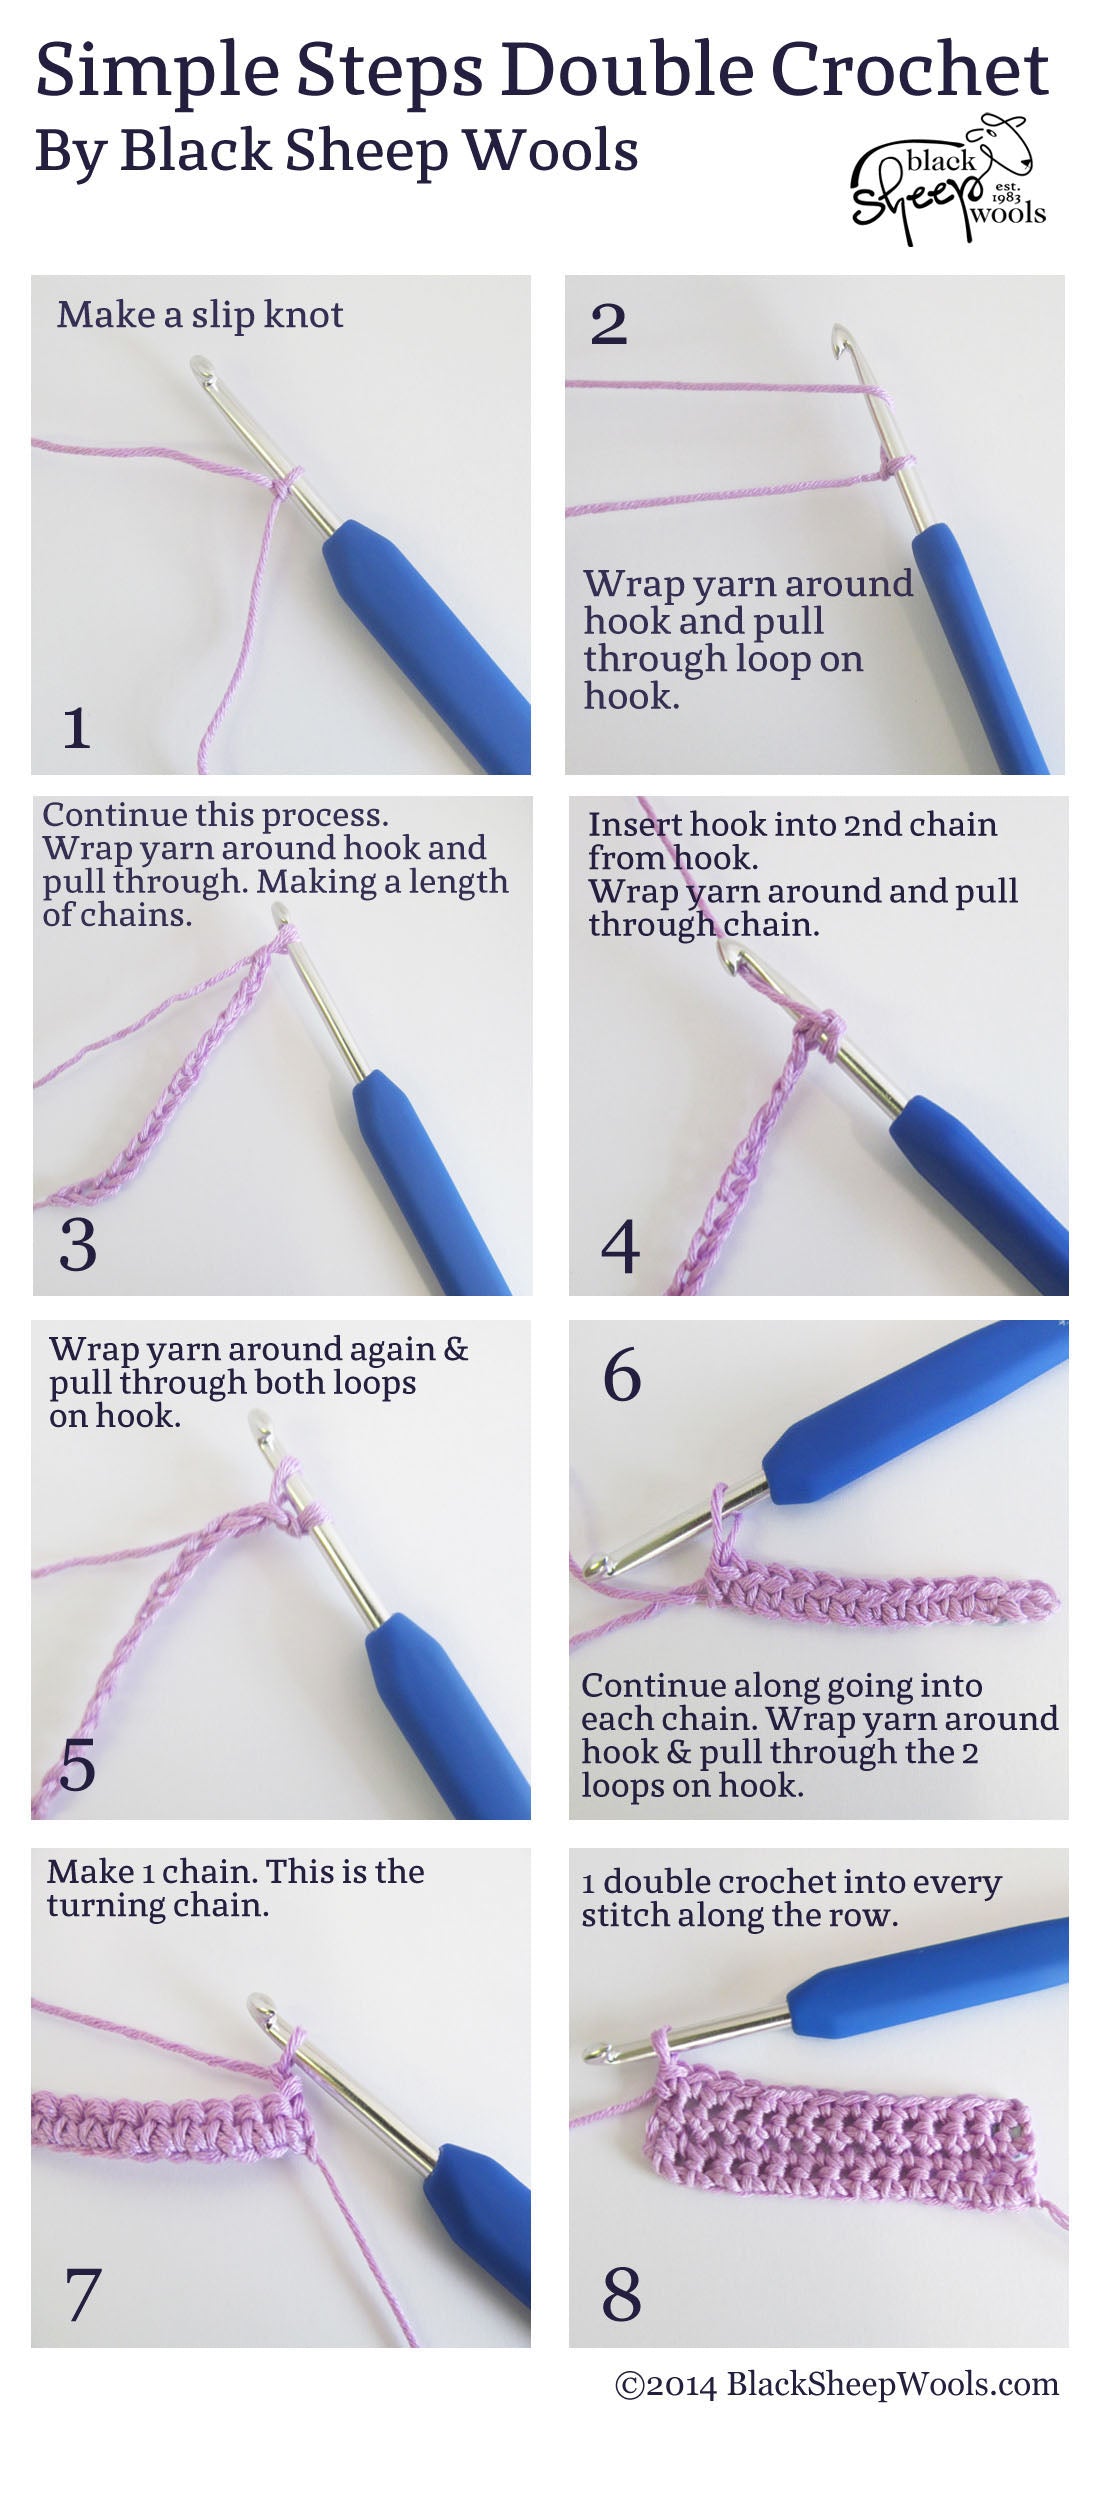 How to do a double crochet - simple steps